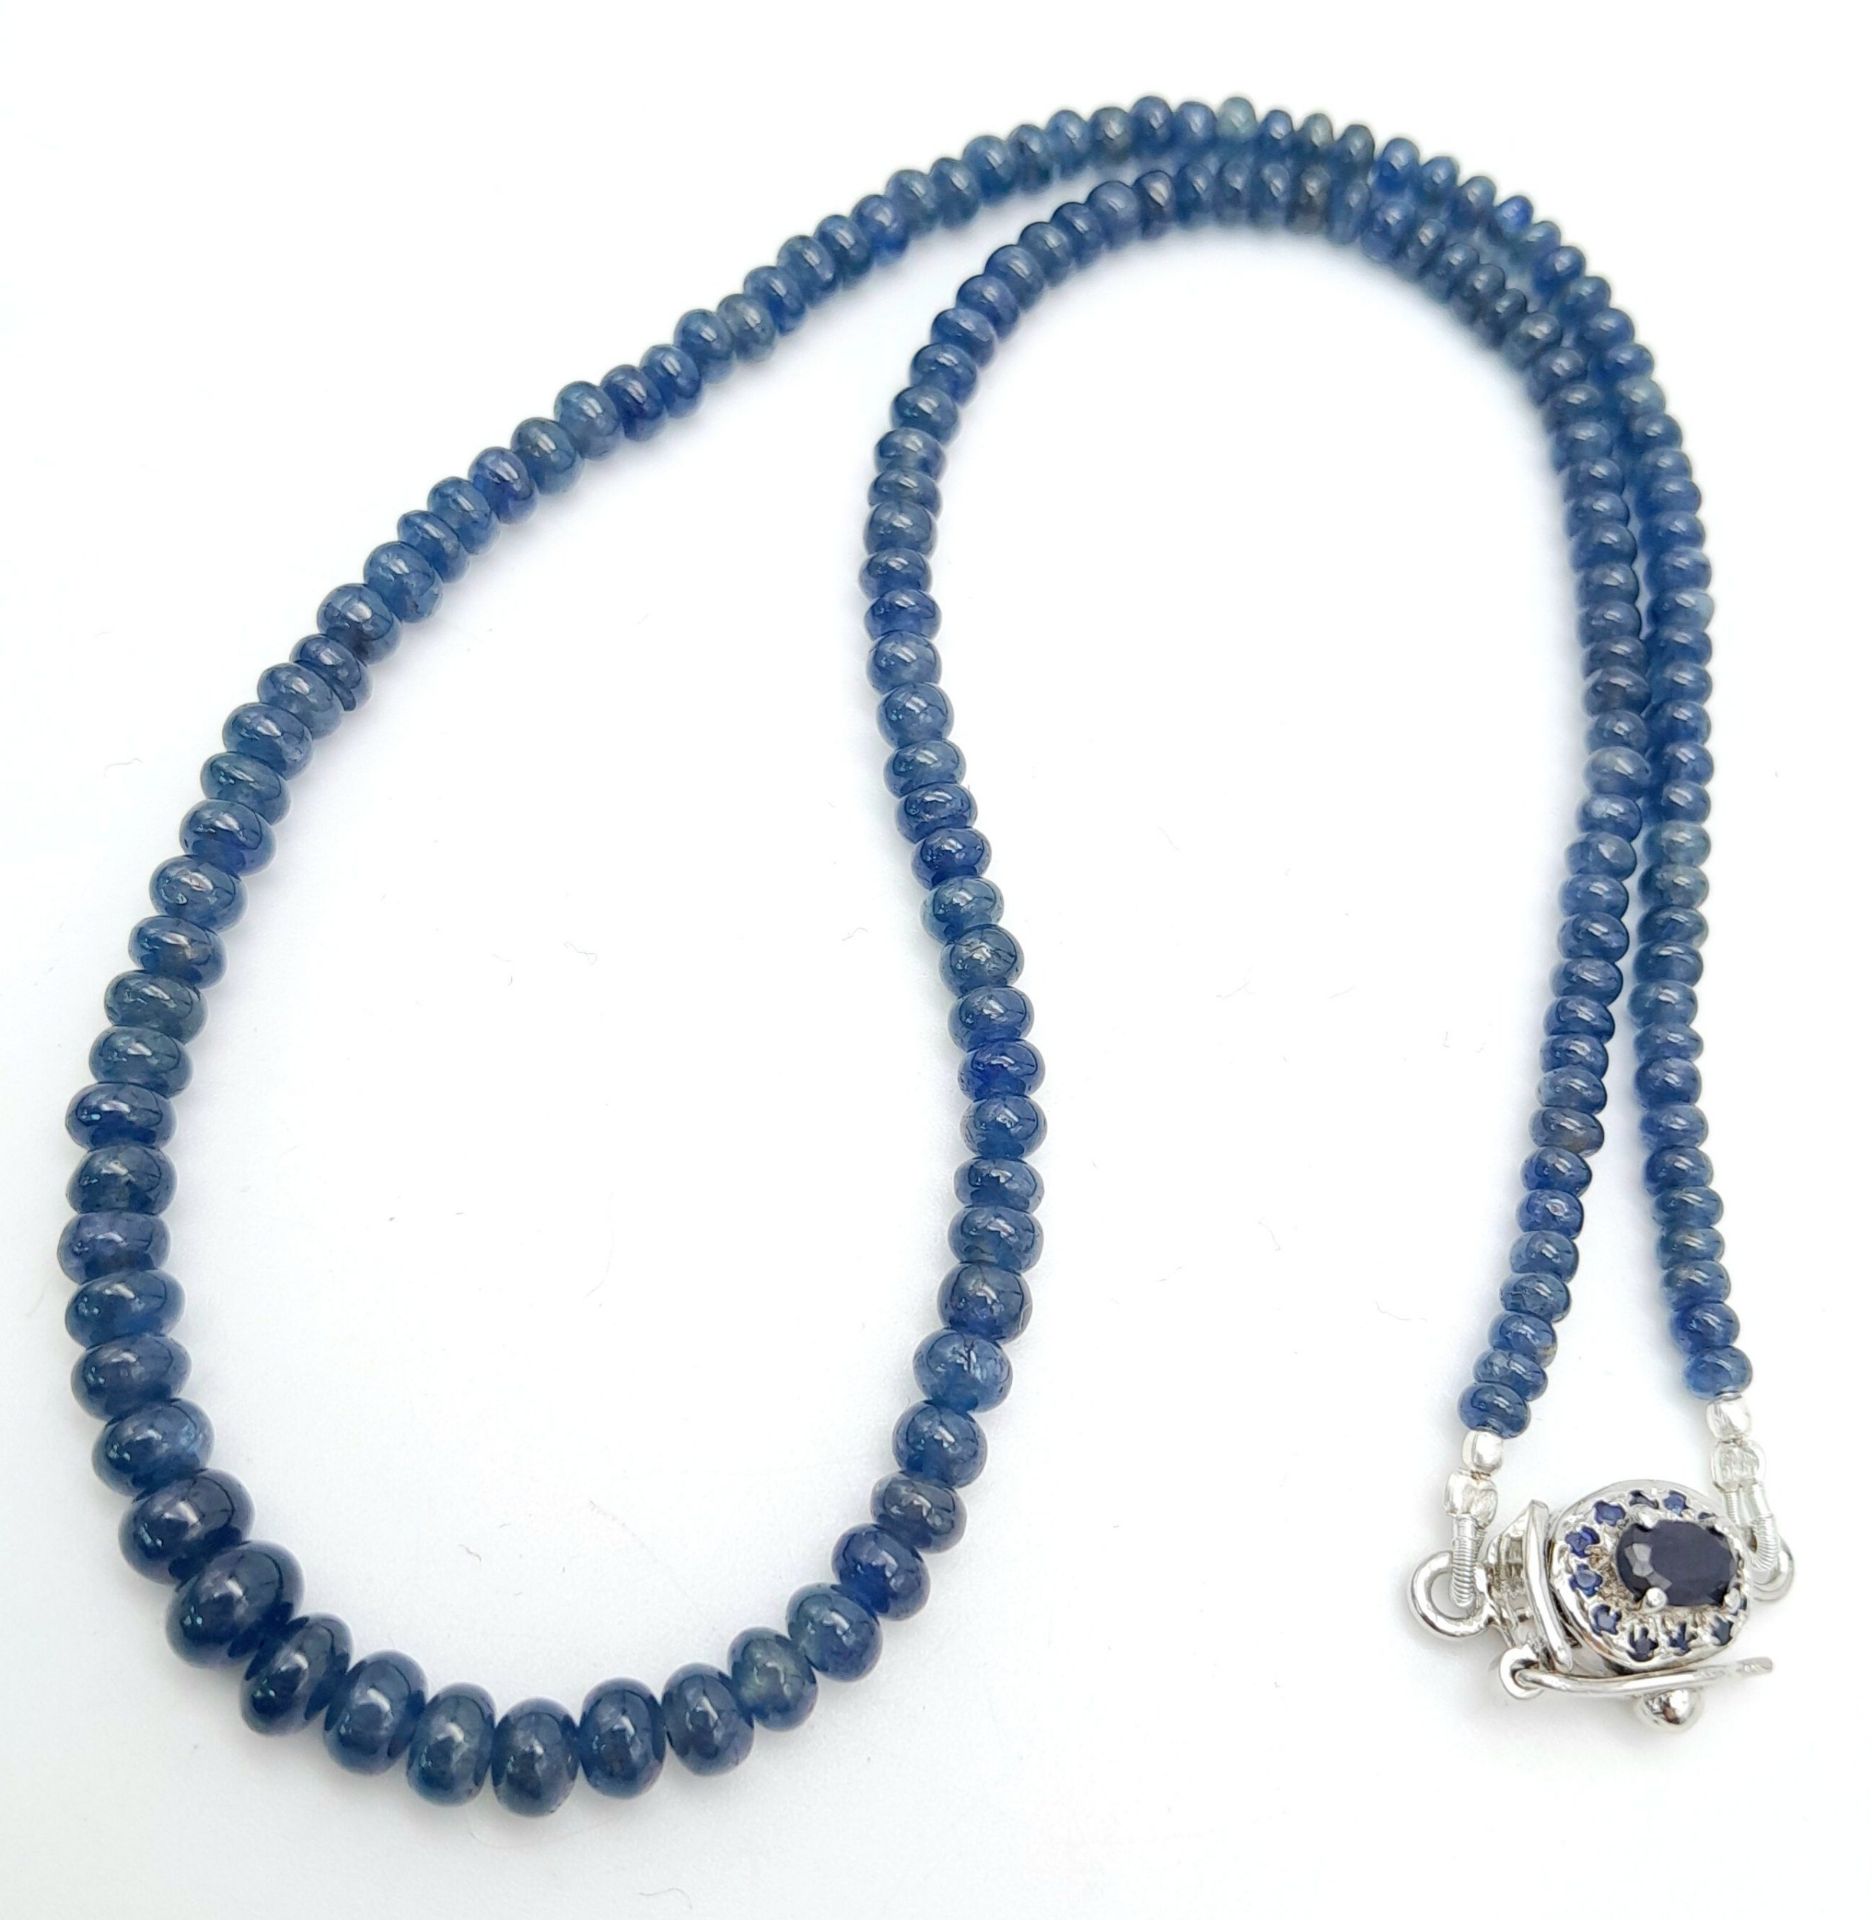 A 115ctw Blue Sapphire Small Rondelle Single Strand Necklace - with Sapphire and 925 Silver clasp.